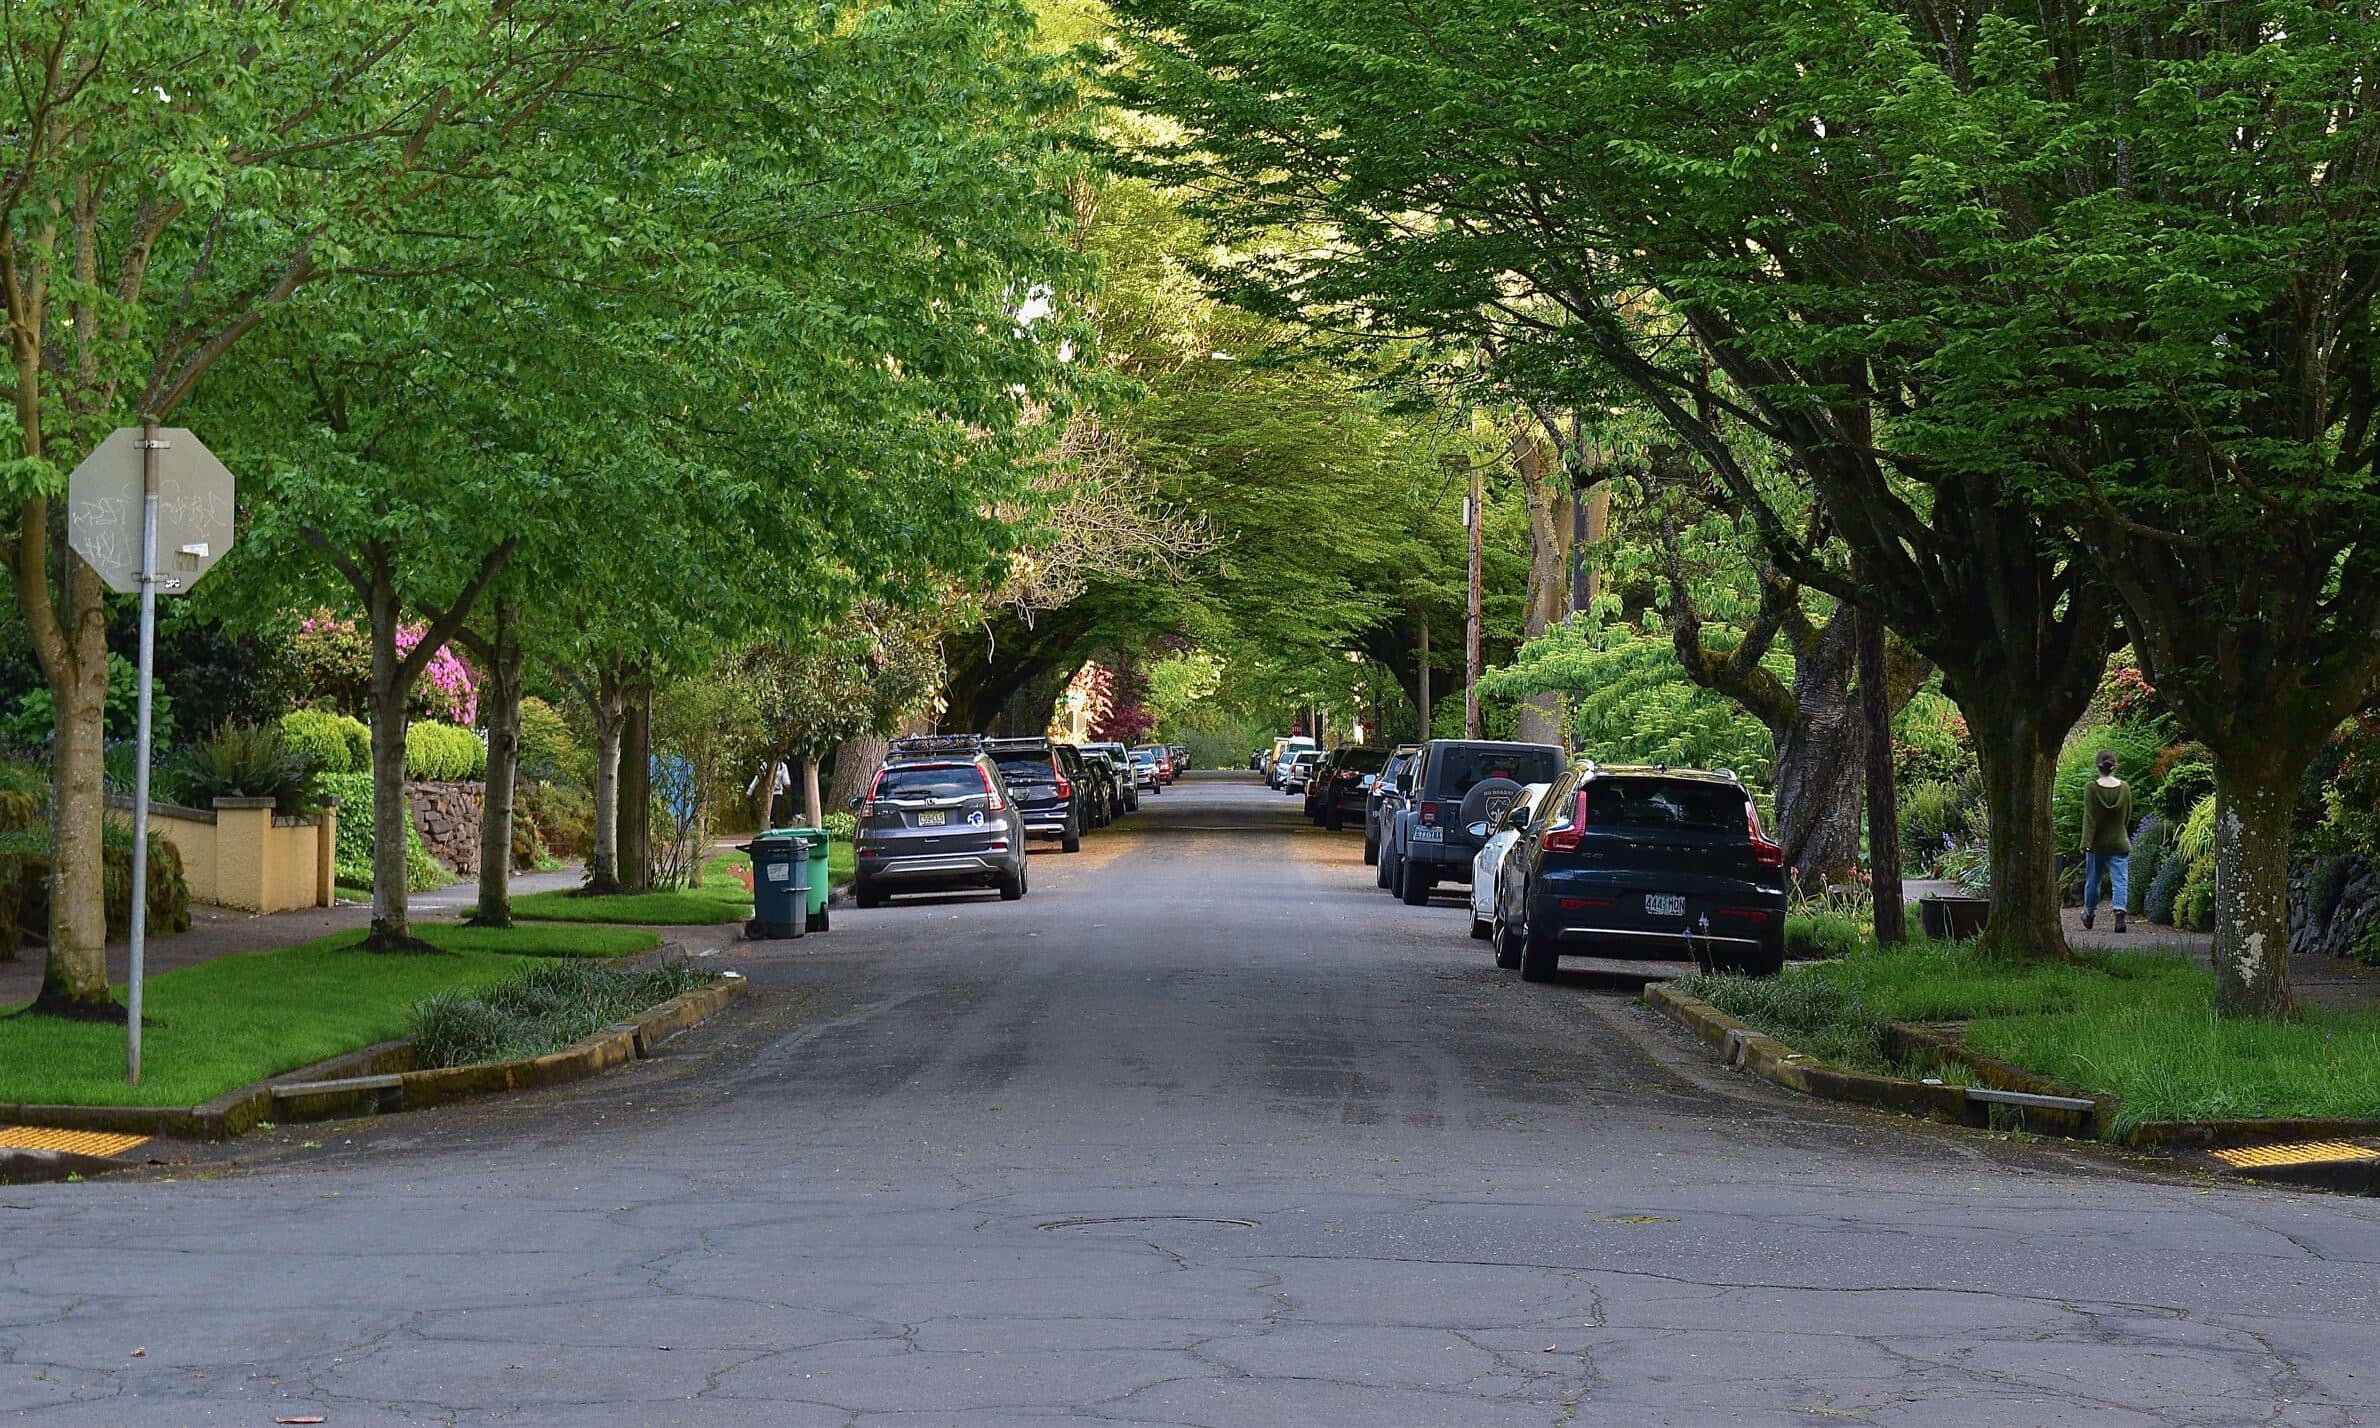 A lush, green neighborhood street on the east side of the Willamette River